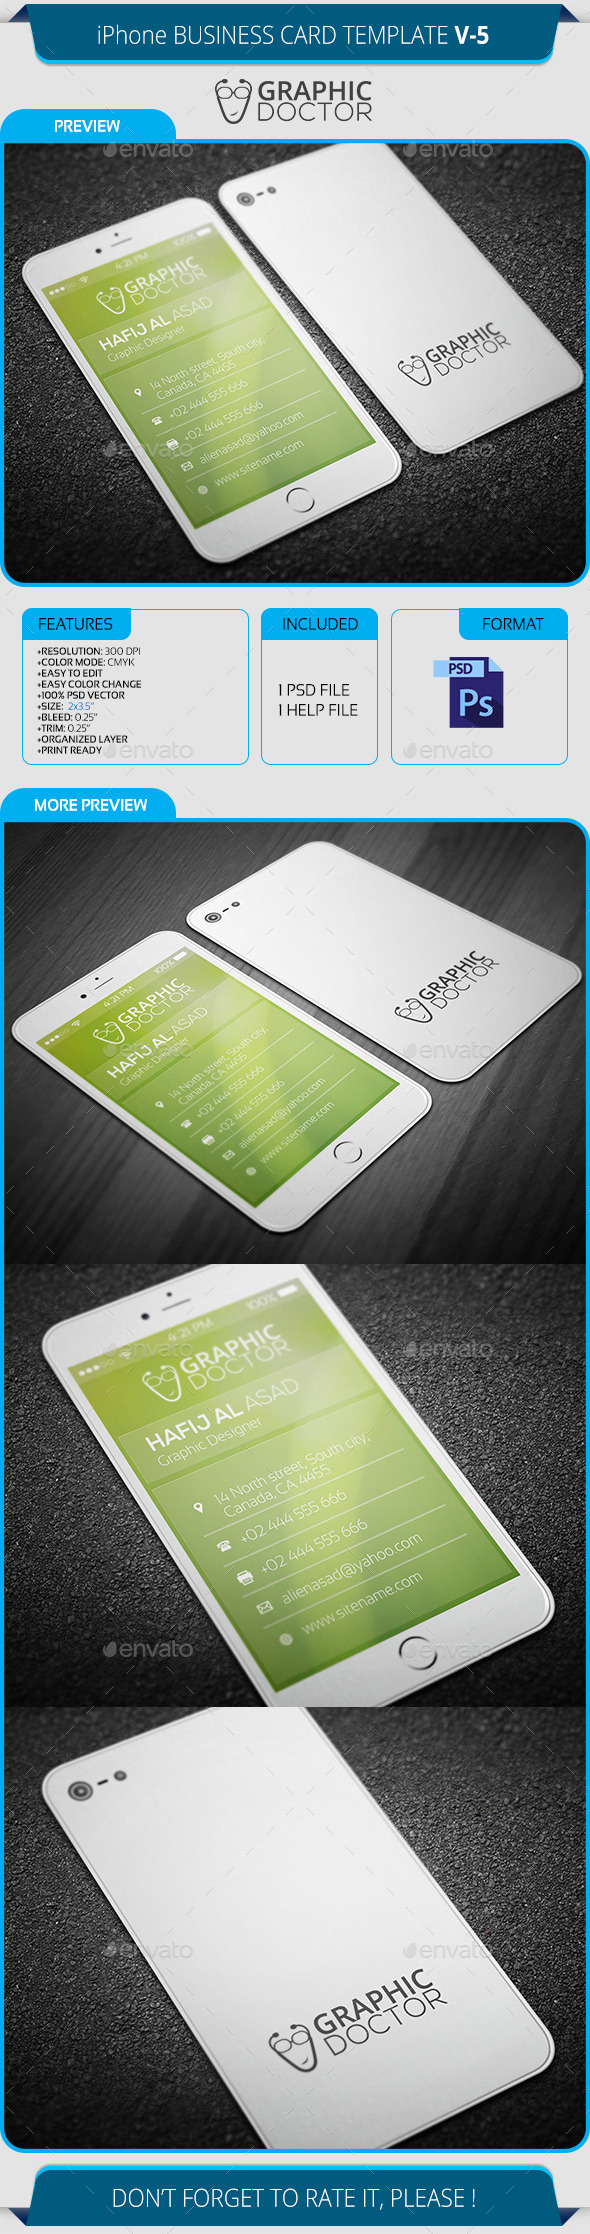 Iphone Business Card Template V 5 Throughout Iphone Business Card Template